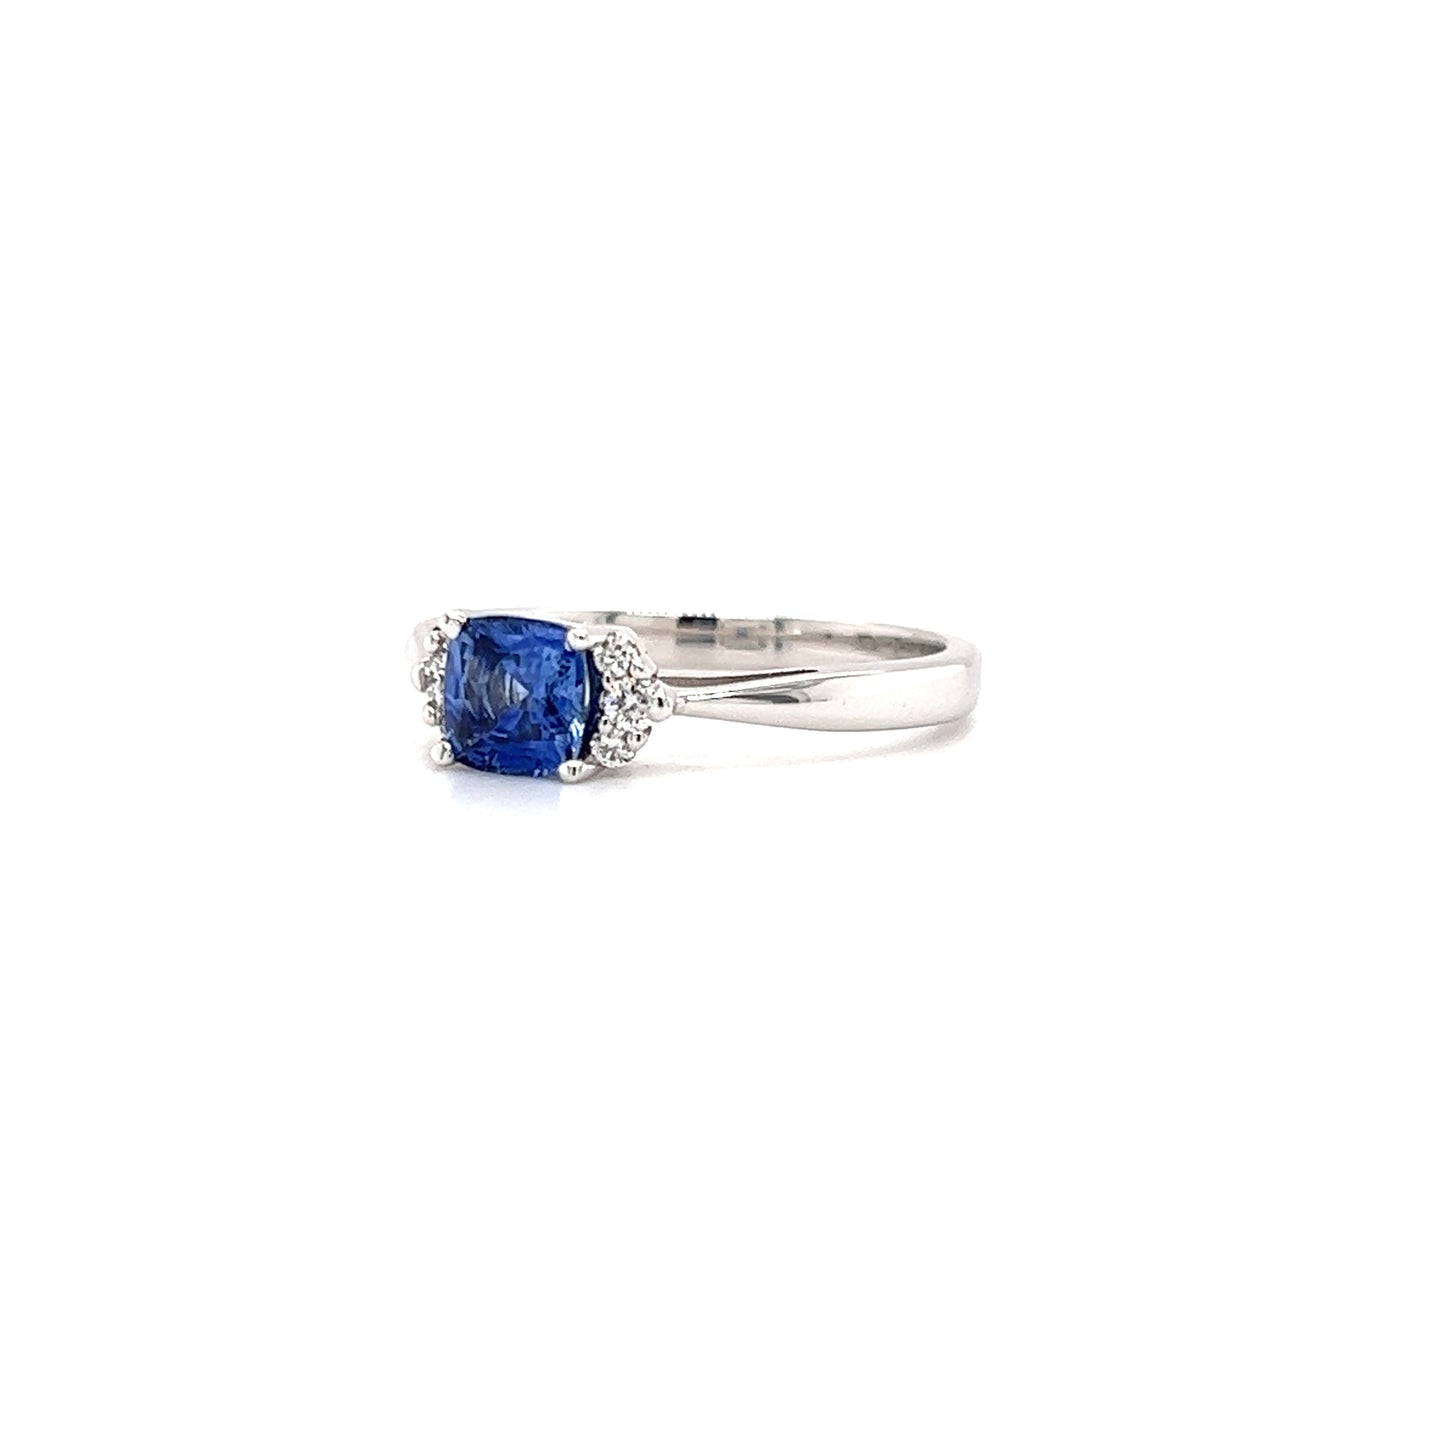 Cushion Sapphire Ring with Six Side Diamonds in 14K White Gold Right Side View